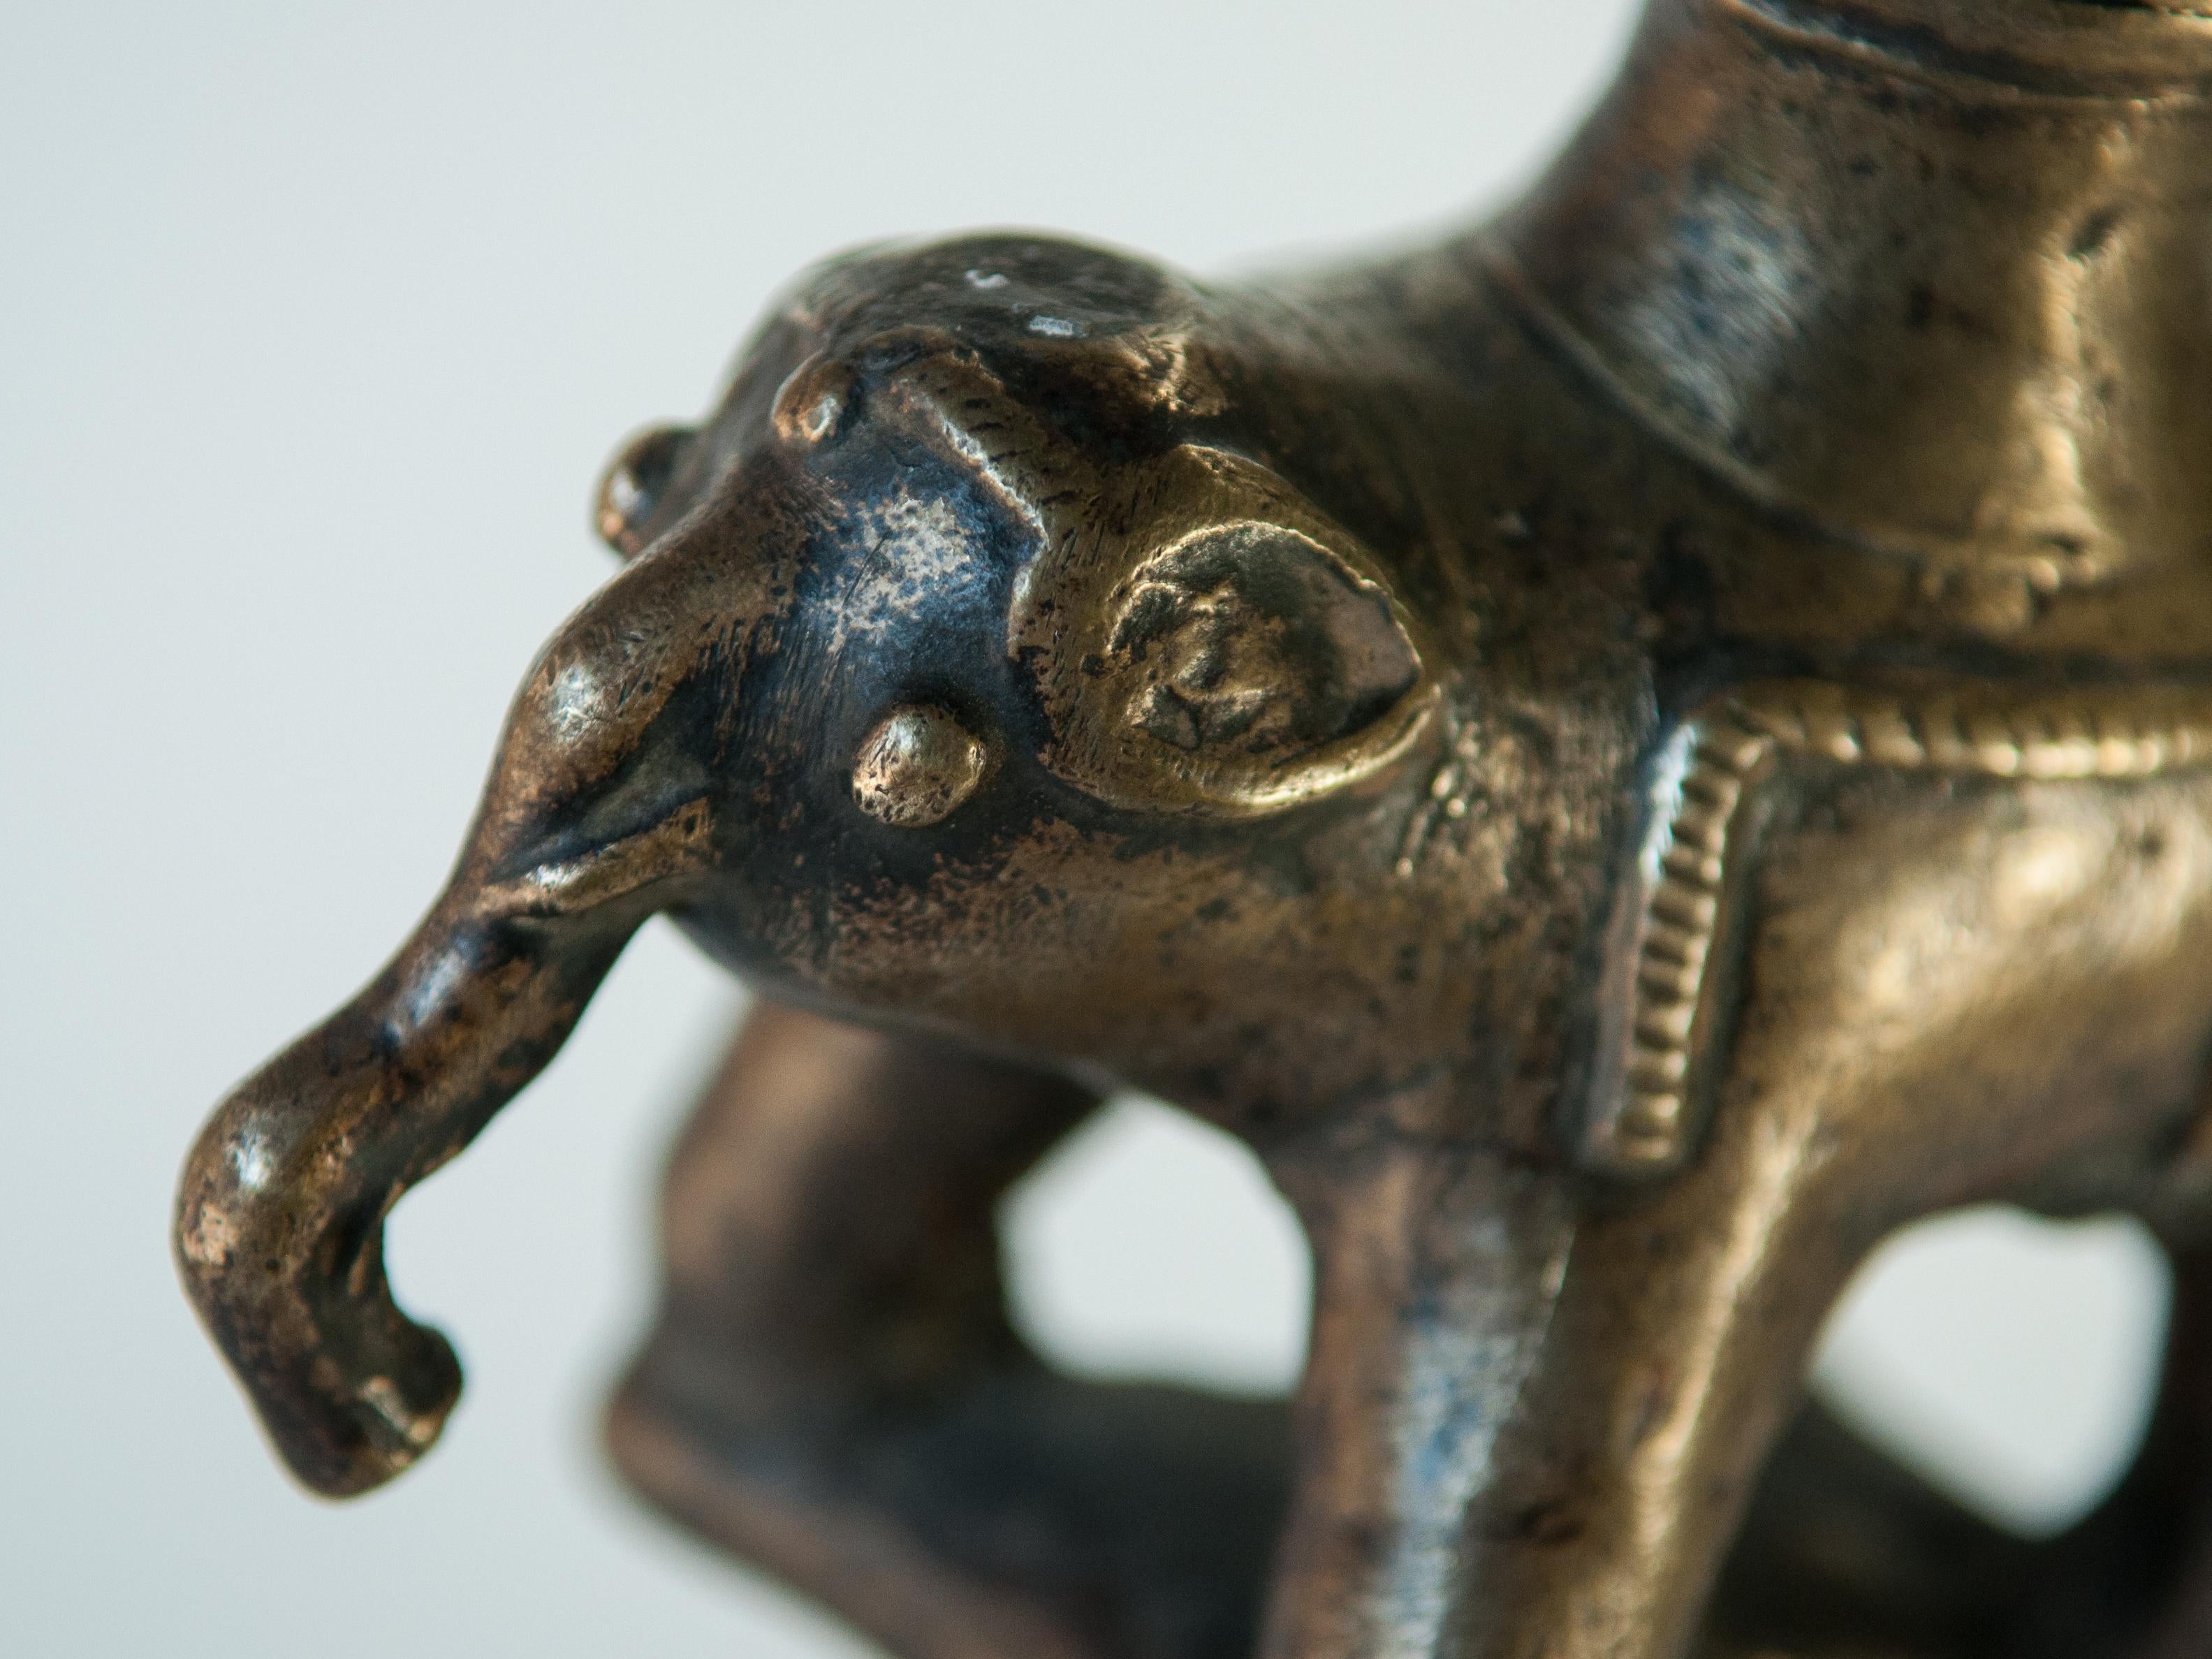 Hand-Crafted Vintage Bronze Oil Lamp with Elephant Motif, Rural Nepal, Mid-Late 20th Century